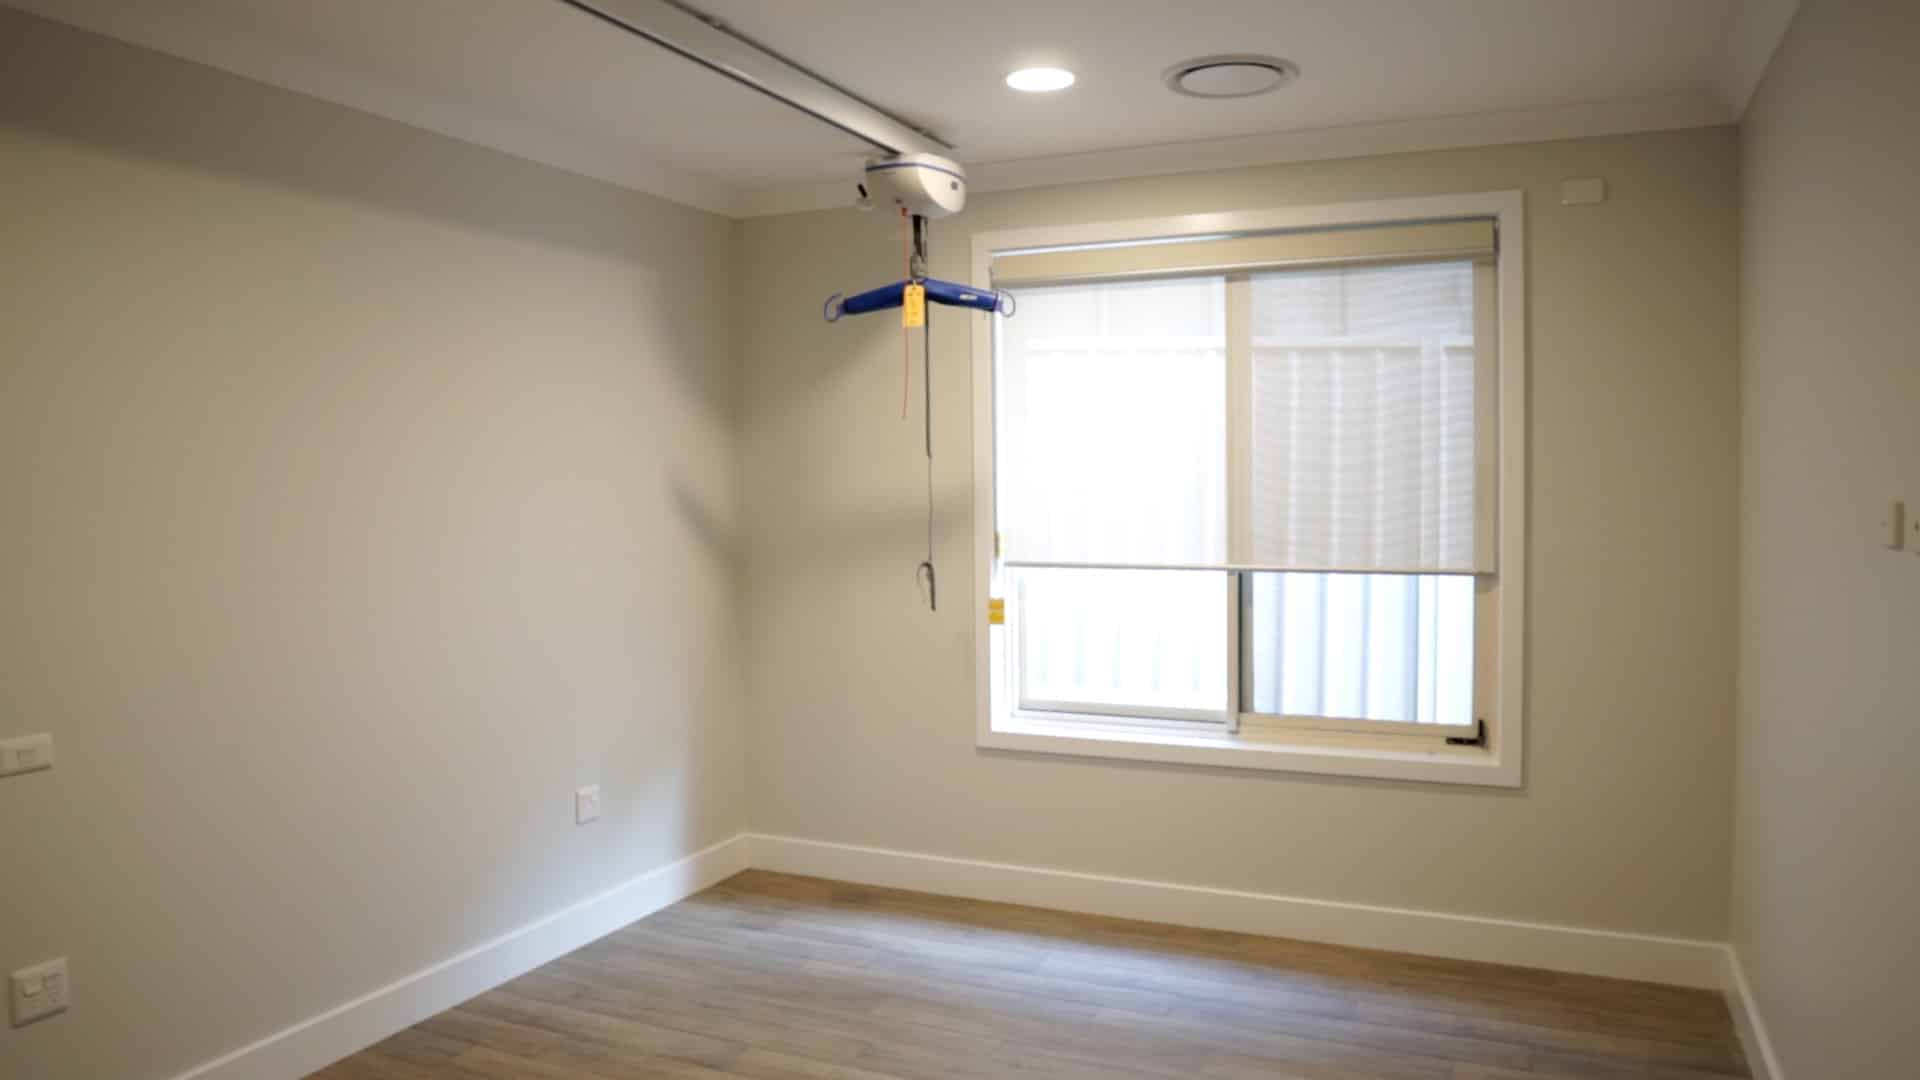 View of a bedroom with a window, floor boards and a ceiling hoist.